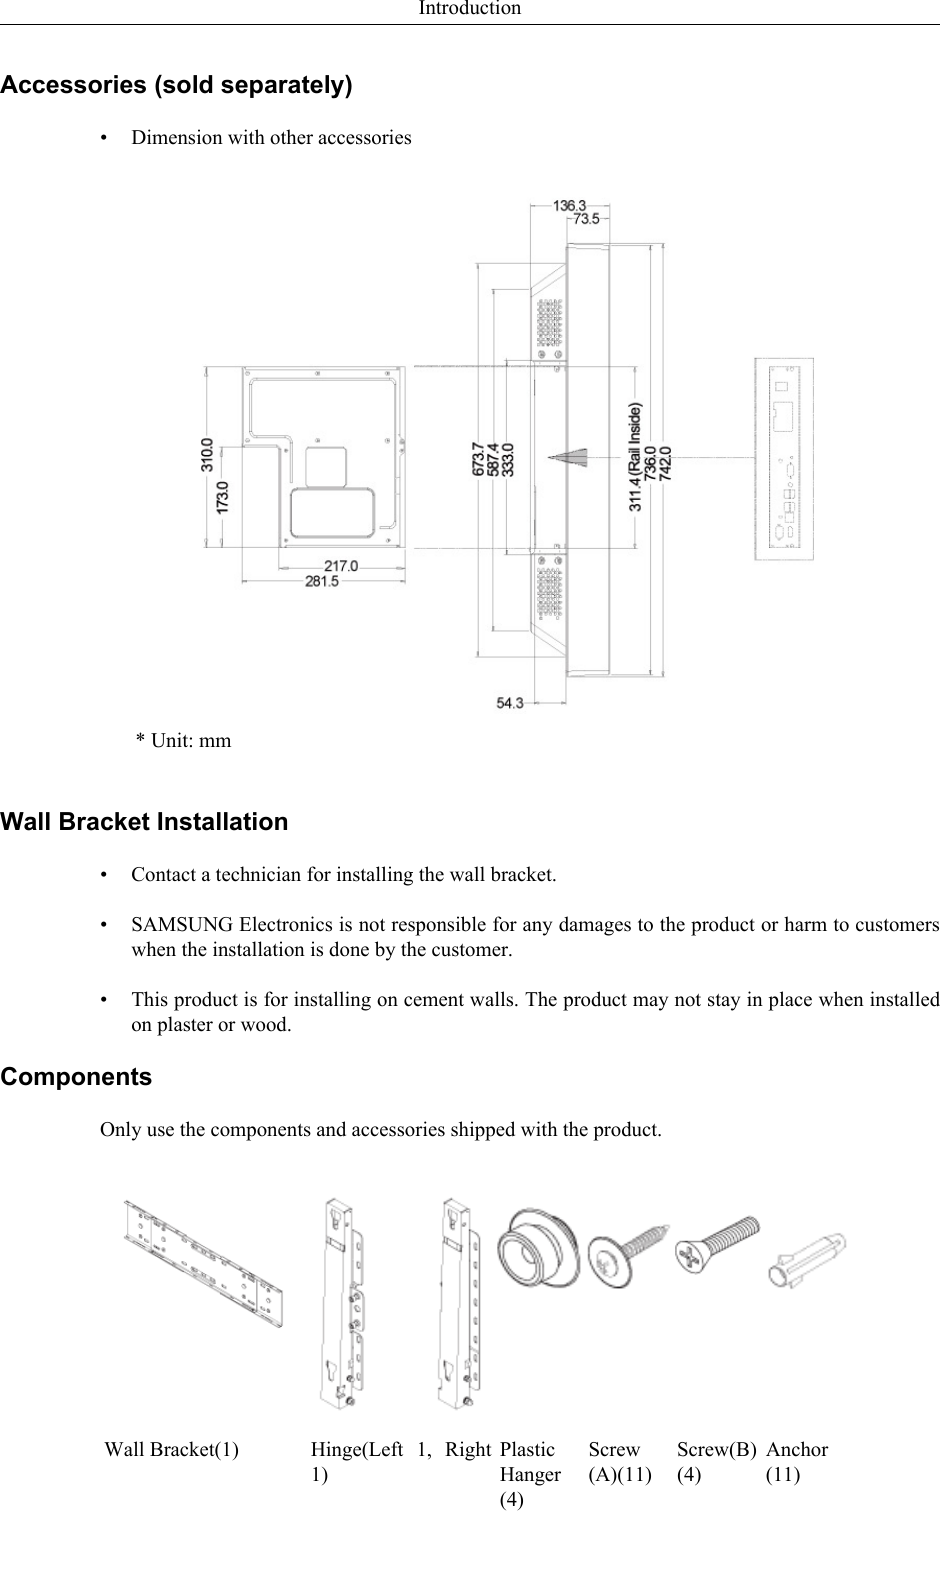 Accessories (sold separately)• Dimension with other accessories* Unit: mmWall Bracket Installation•Contact a technician for installing the wall bracket.• SAMSUNG Electronics is not responsible for any damages to the product or harm to customerswhen the installation is done by the customer.• This product is for installing on cement walls. The product may not stay in place when installedon plaster or wood.ComponentsOnly use the components and accessories shipped with the product.Wall Bracket(1) Hinge(Left  1,  Right1)PlasticHanger(4)Screw(A)(11)Screw(B)(4)Anchor(11)Introduction